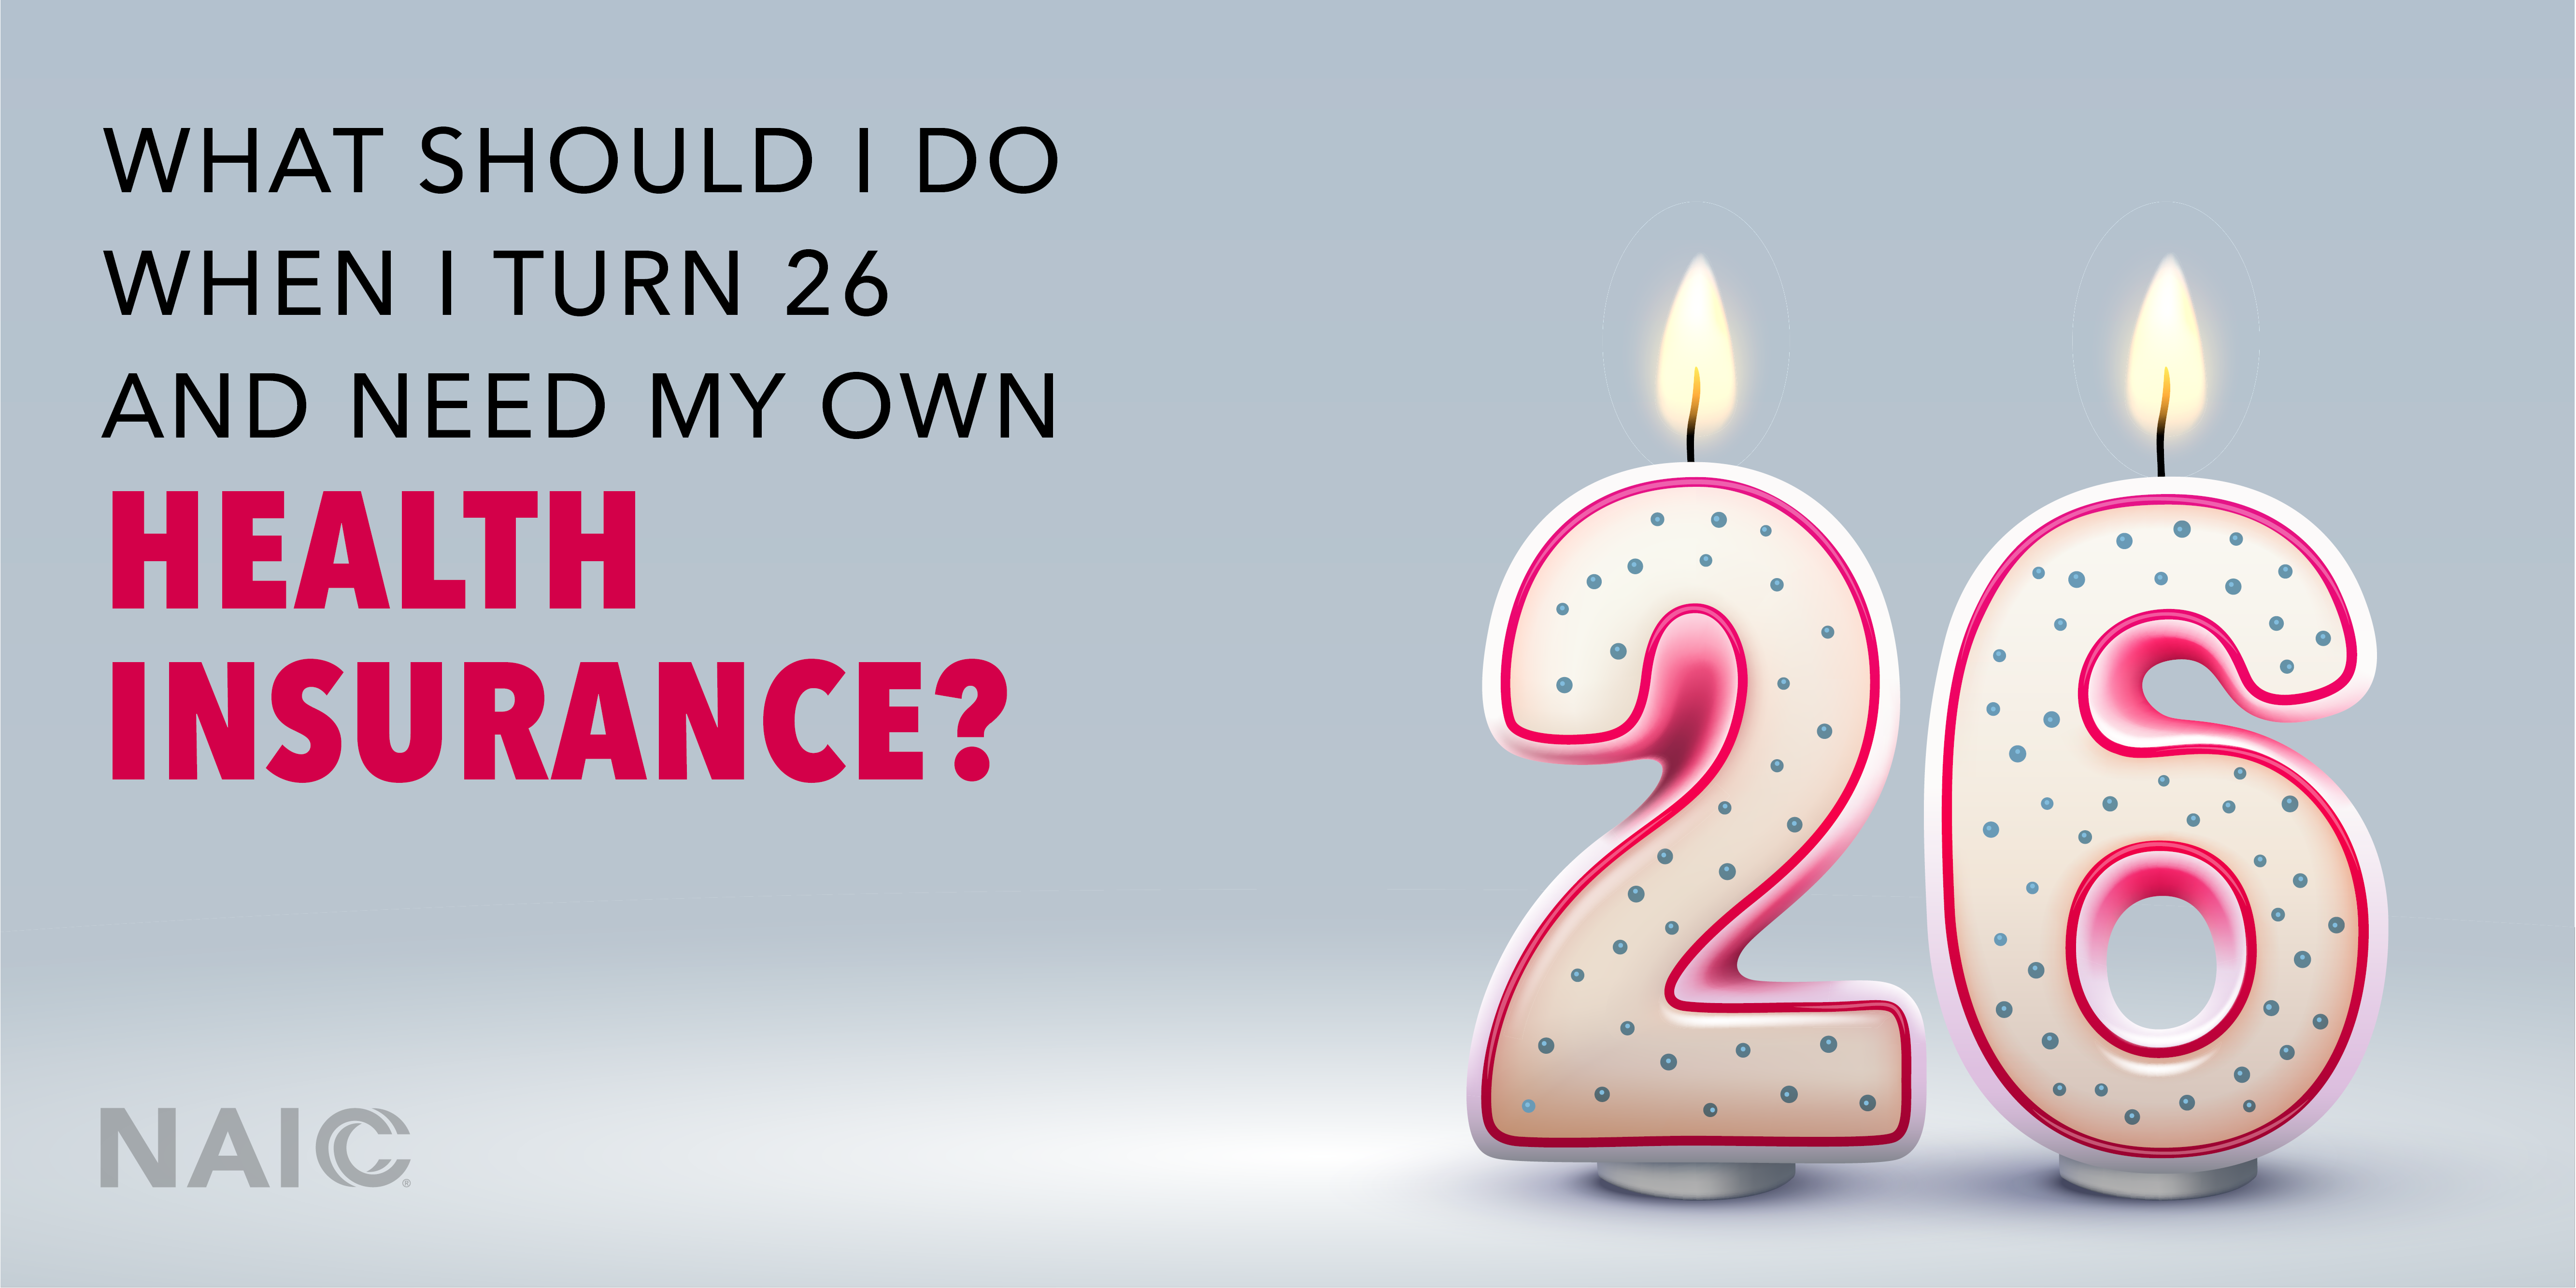 The text reads, "What should I do when I turn 26 and need my own health insurace?" To the right of the image, which is on a blue background, are birthday candles for 26